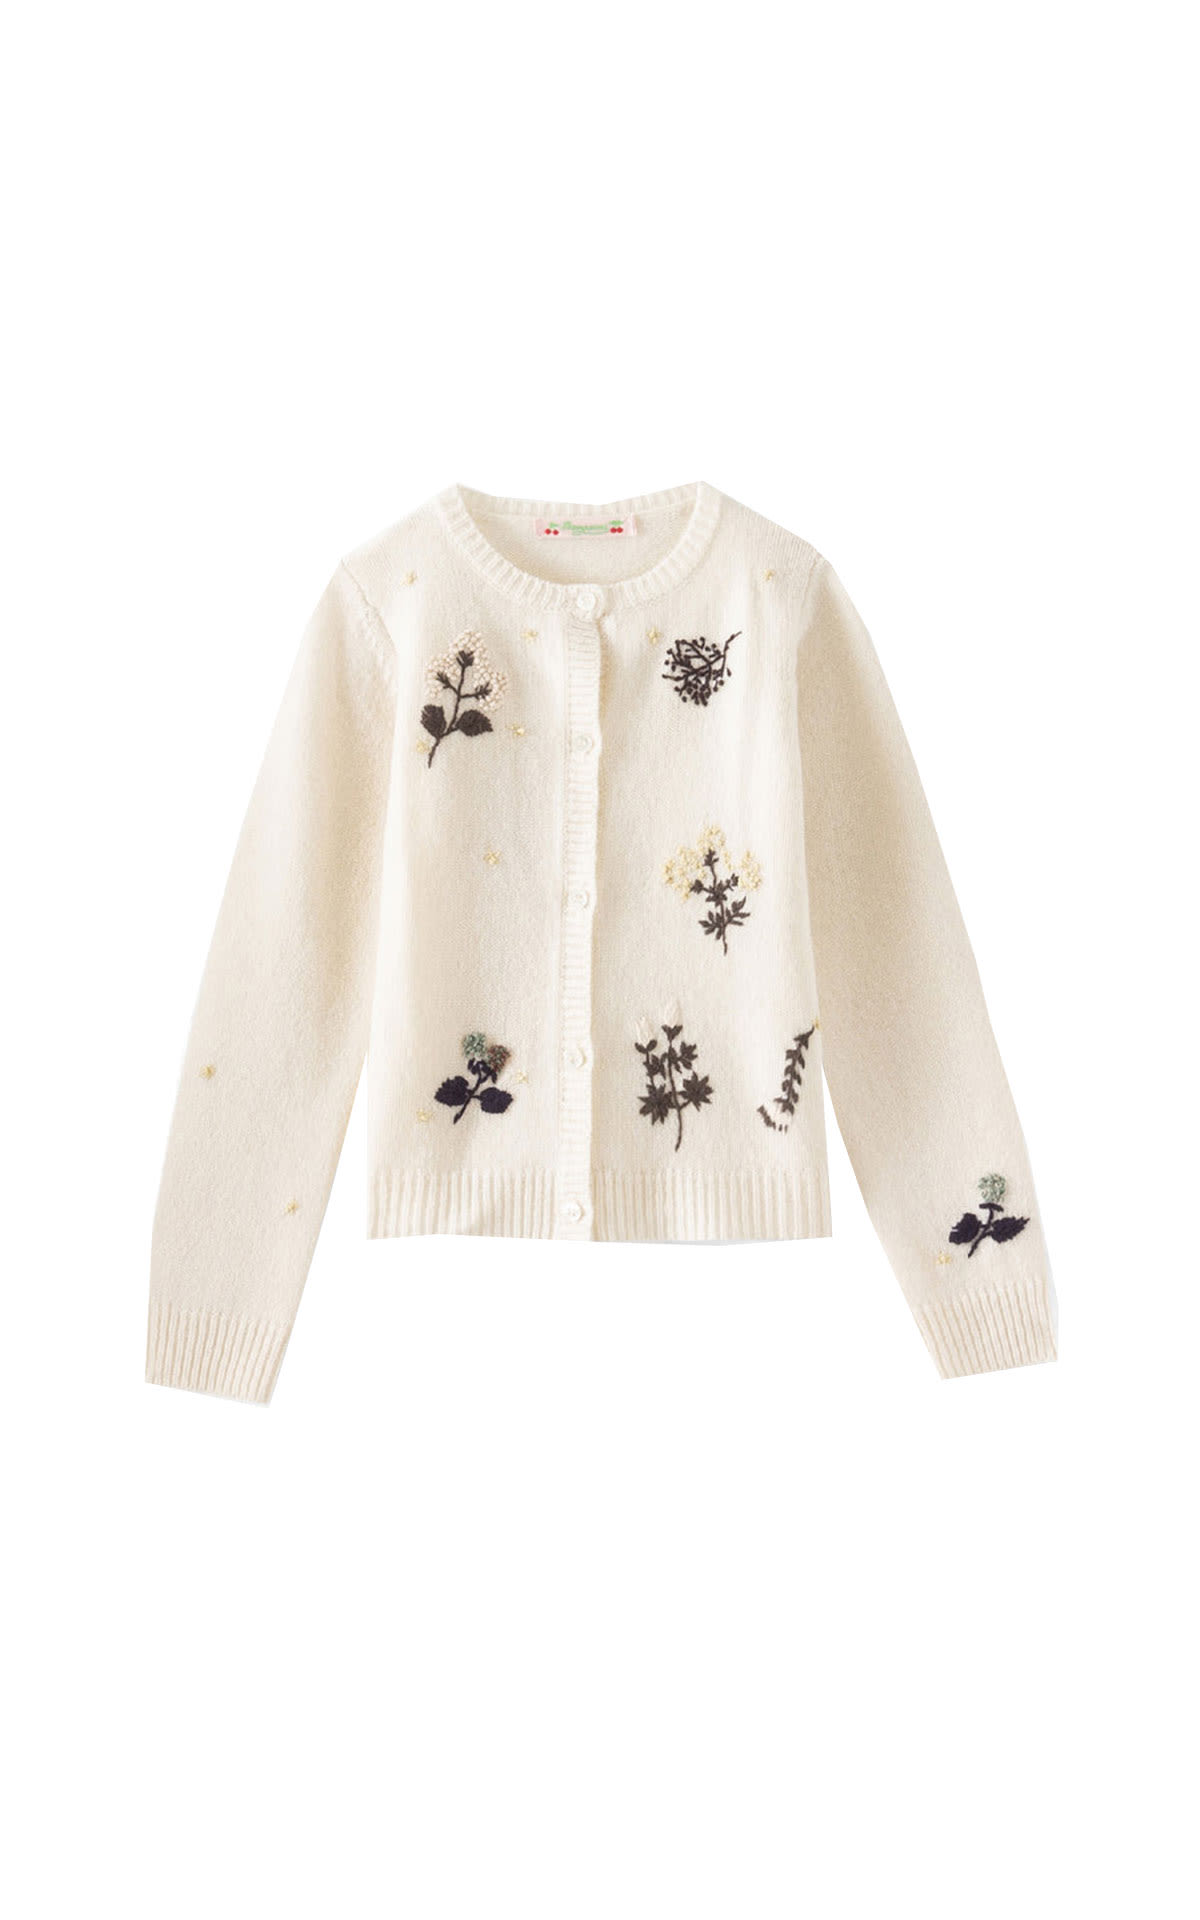 Bonpoint Girl's cream cardigan from Bicester Village